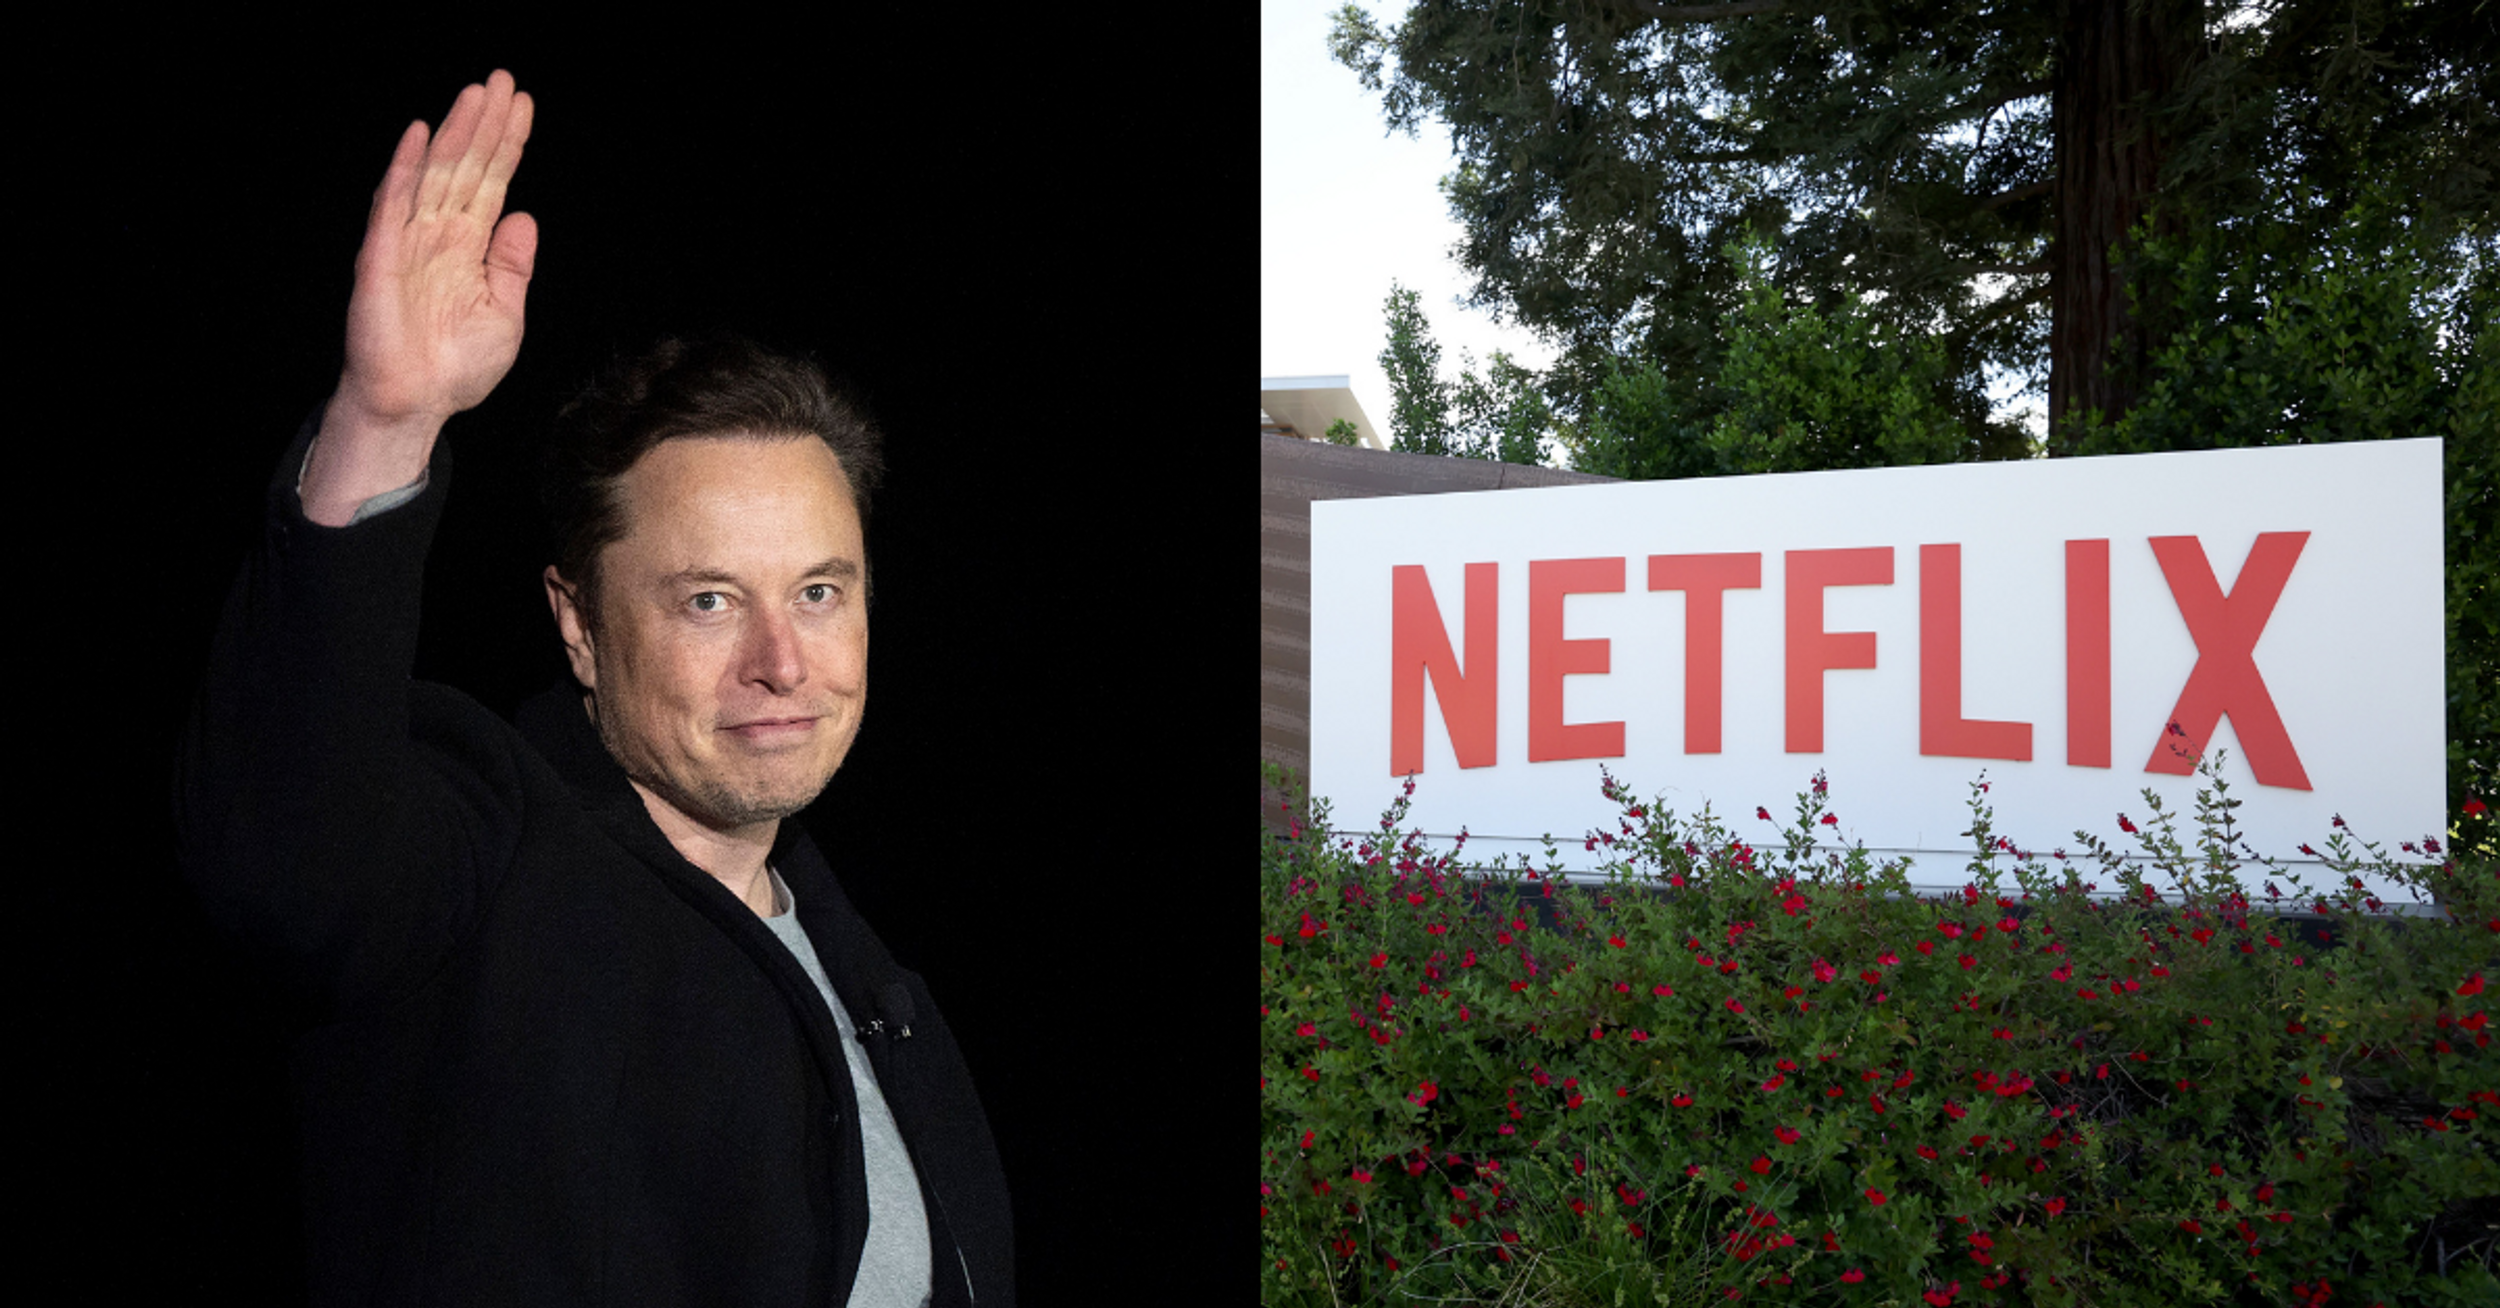 Elon Musk Blames 'Woke Mind Virus' For Netflix's Decline After Subscribers And Stock Prices Fall